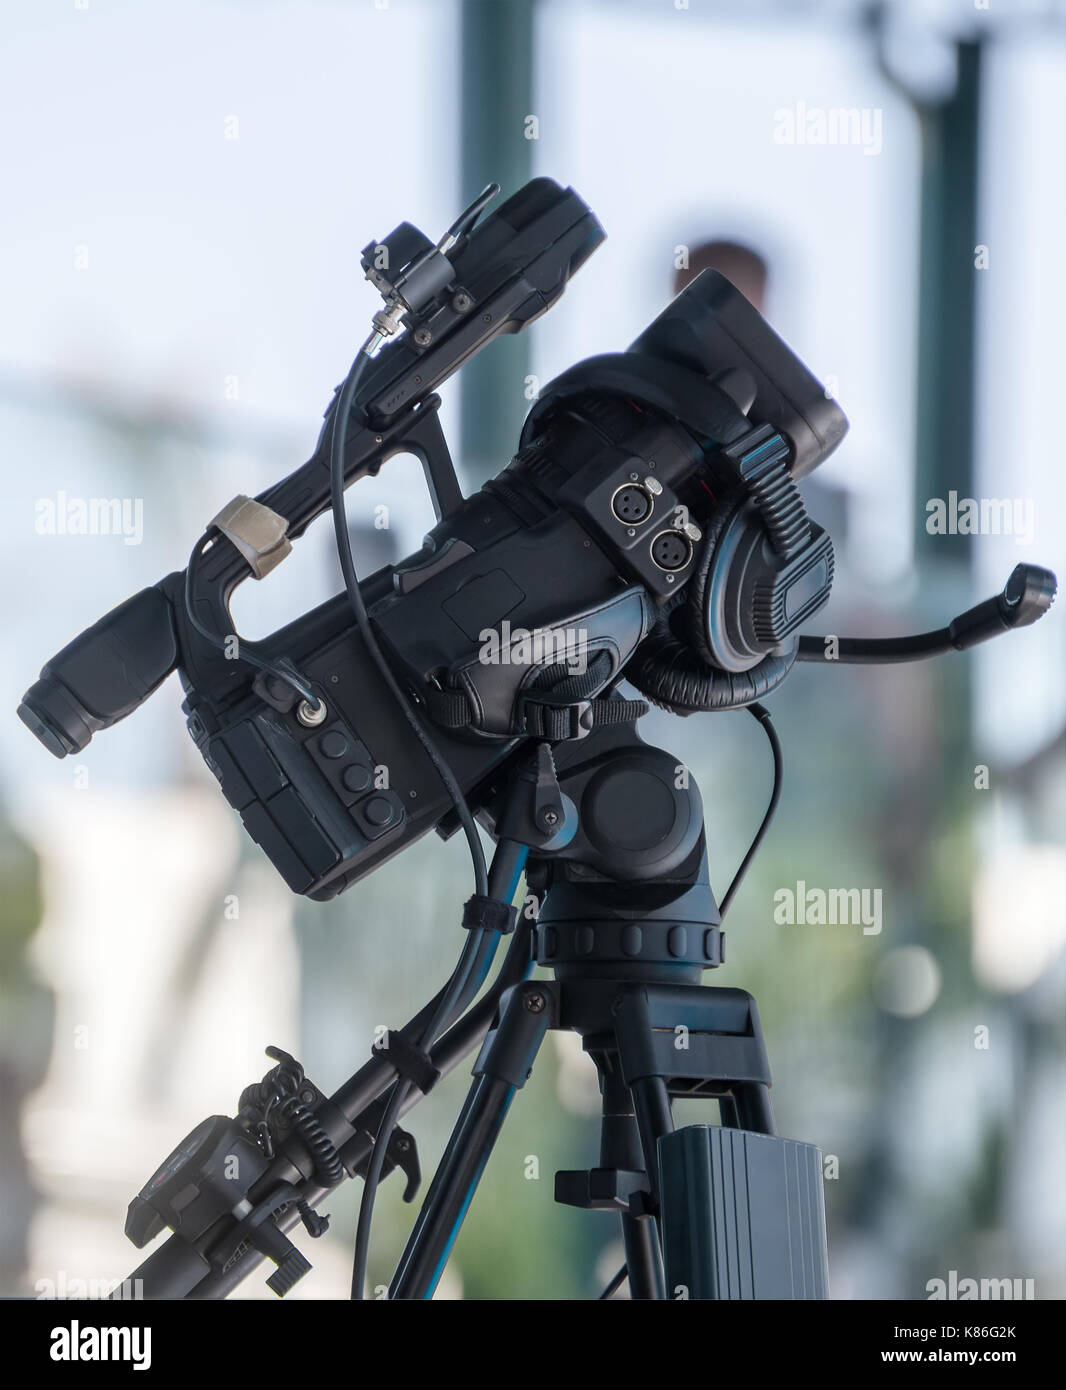 Close-up view of professional TV camera. Stock Photo